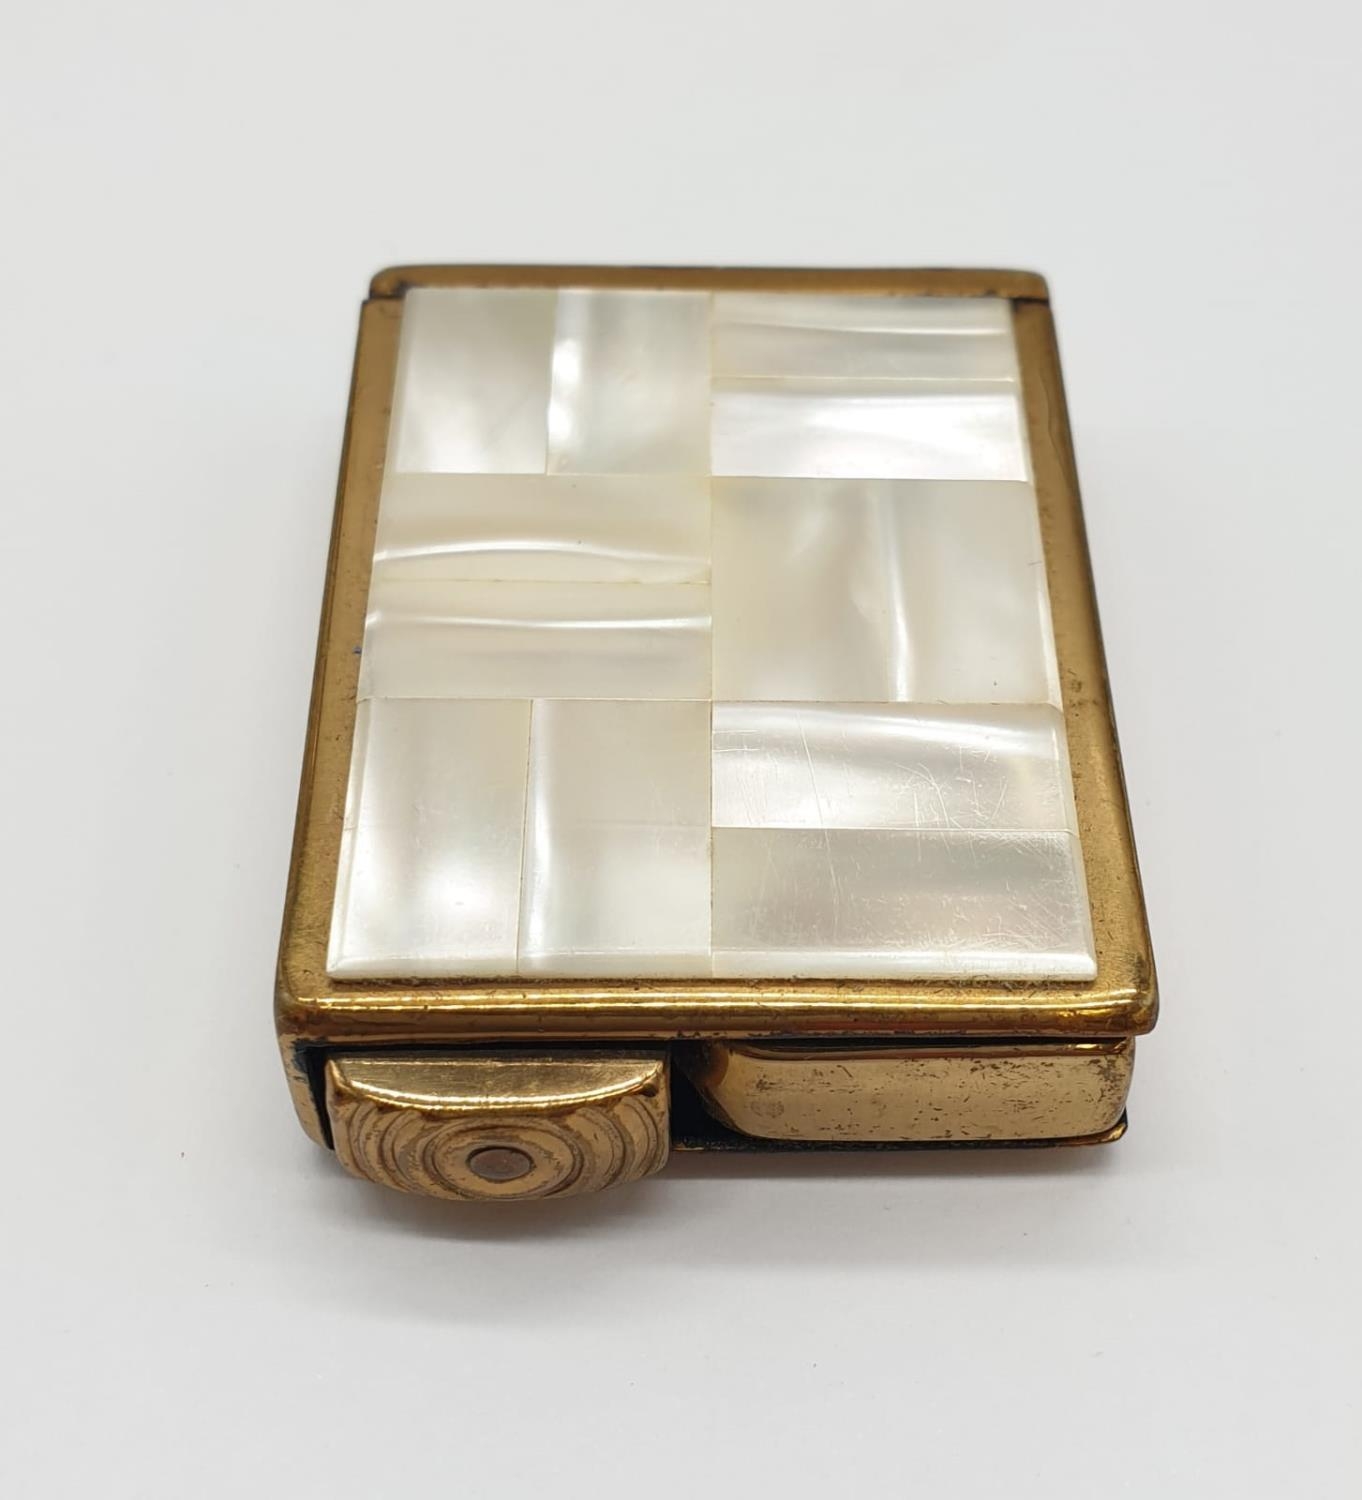 La Dona scent sprayer, shaped like a cigarette lighter with mother of pearl décor, 66.5 grams, 3. - Image 4 of 5